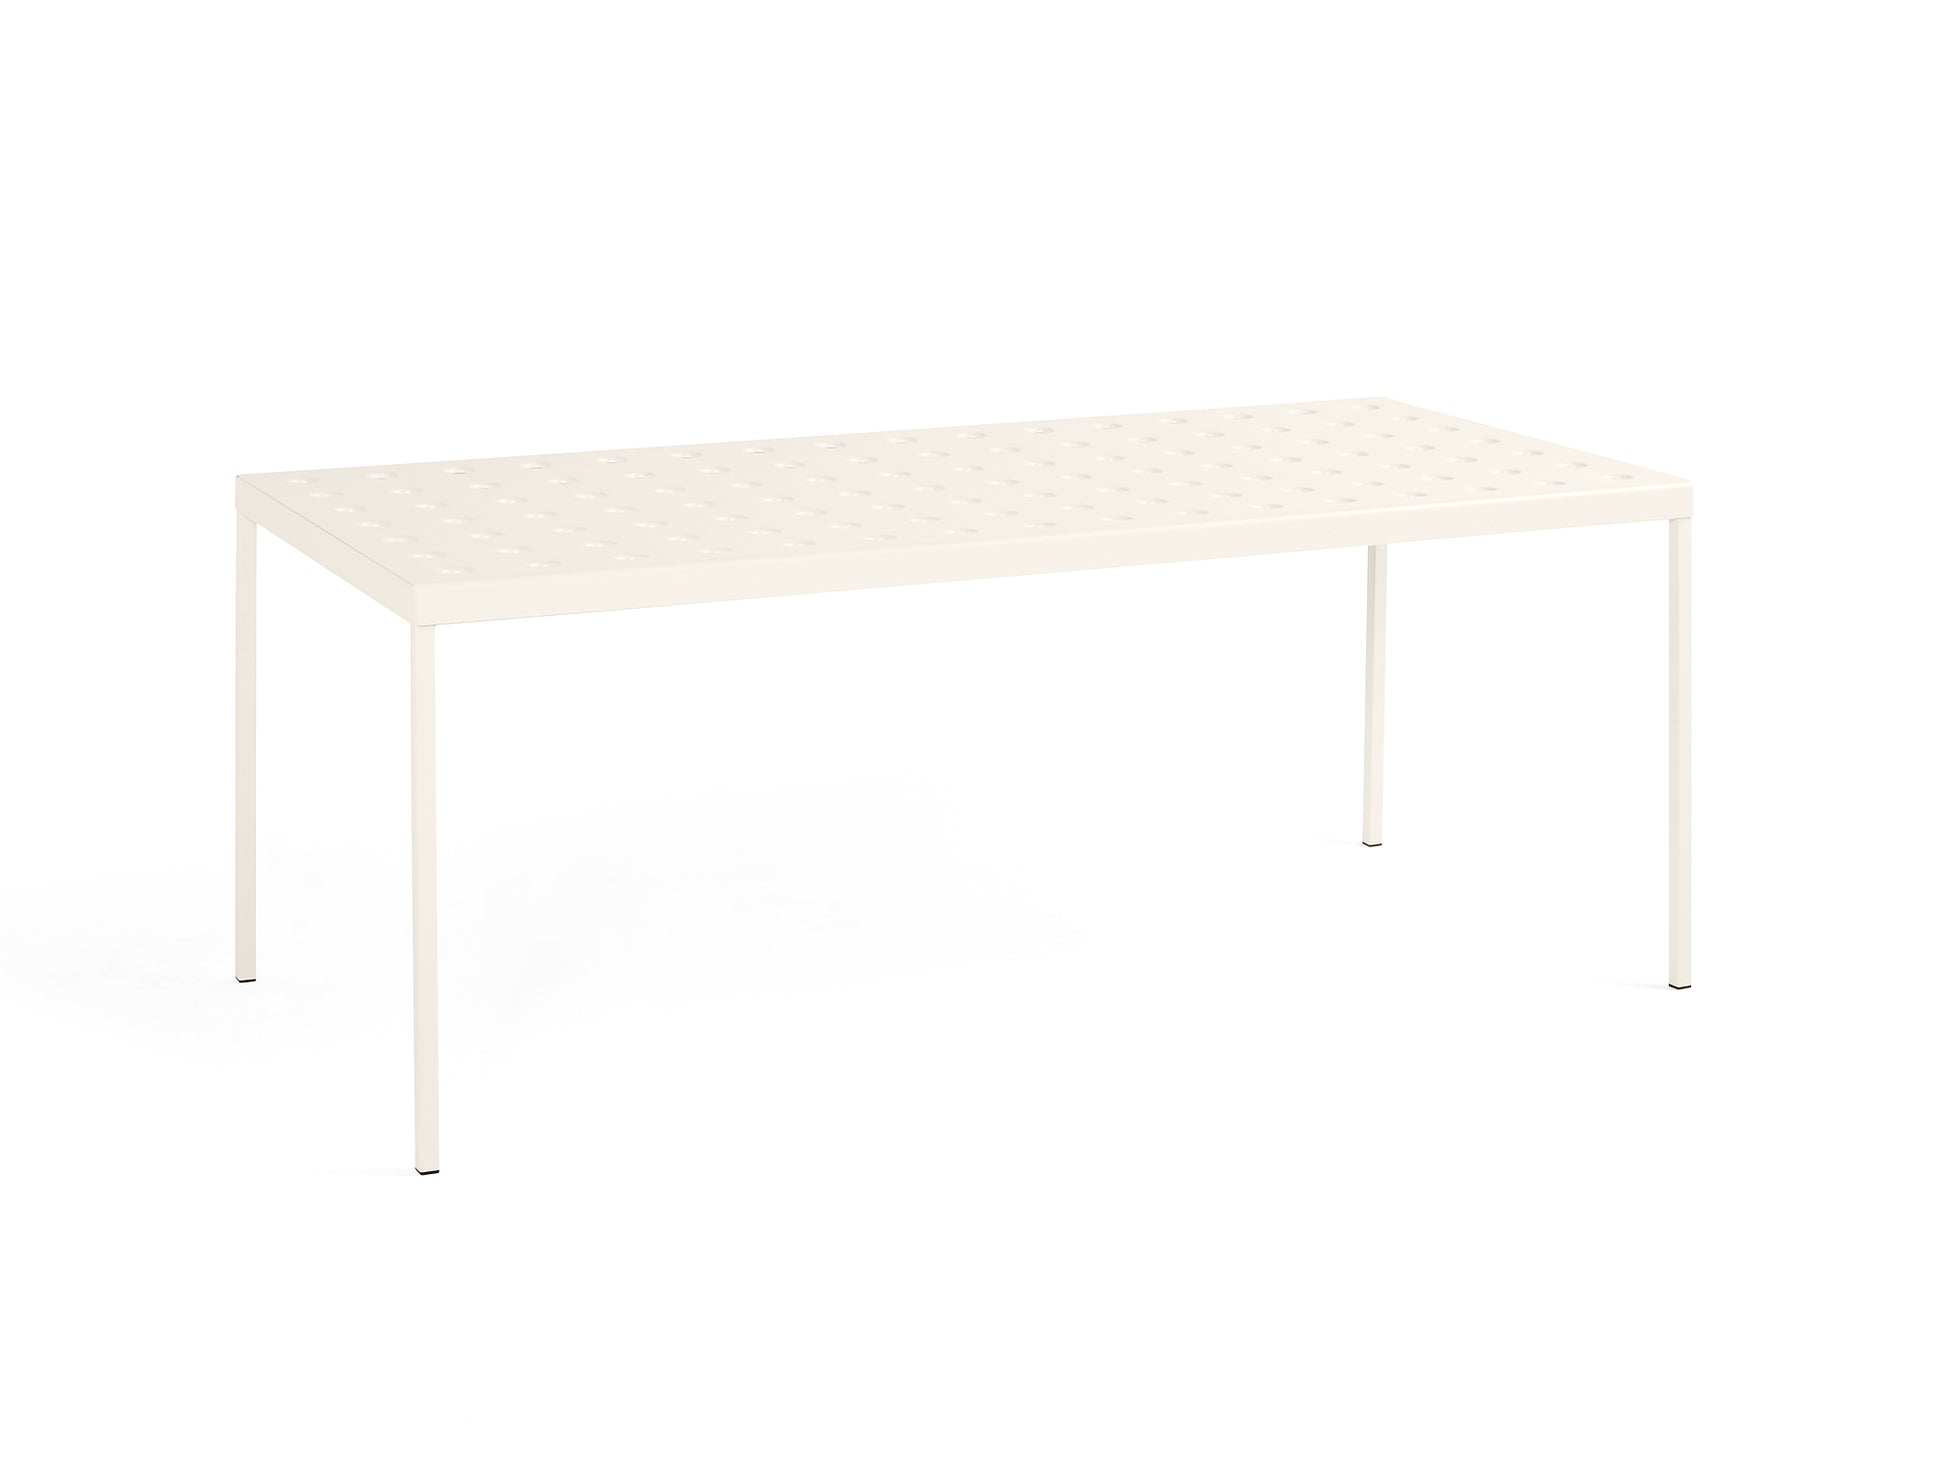 Chalk Beige / L190 cm / Balcony Outdoor Dining Table by HAY